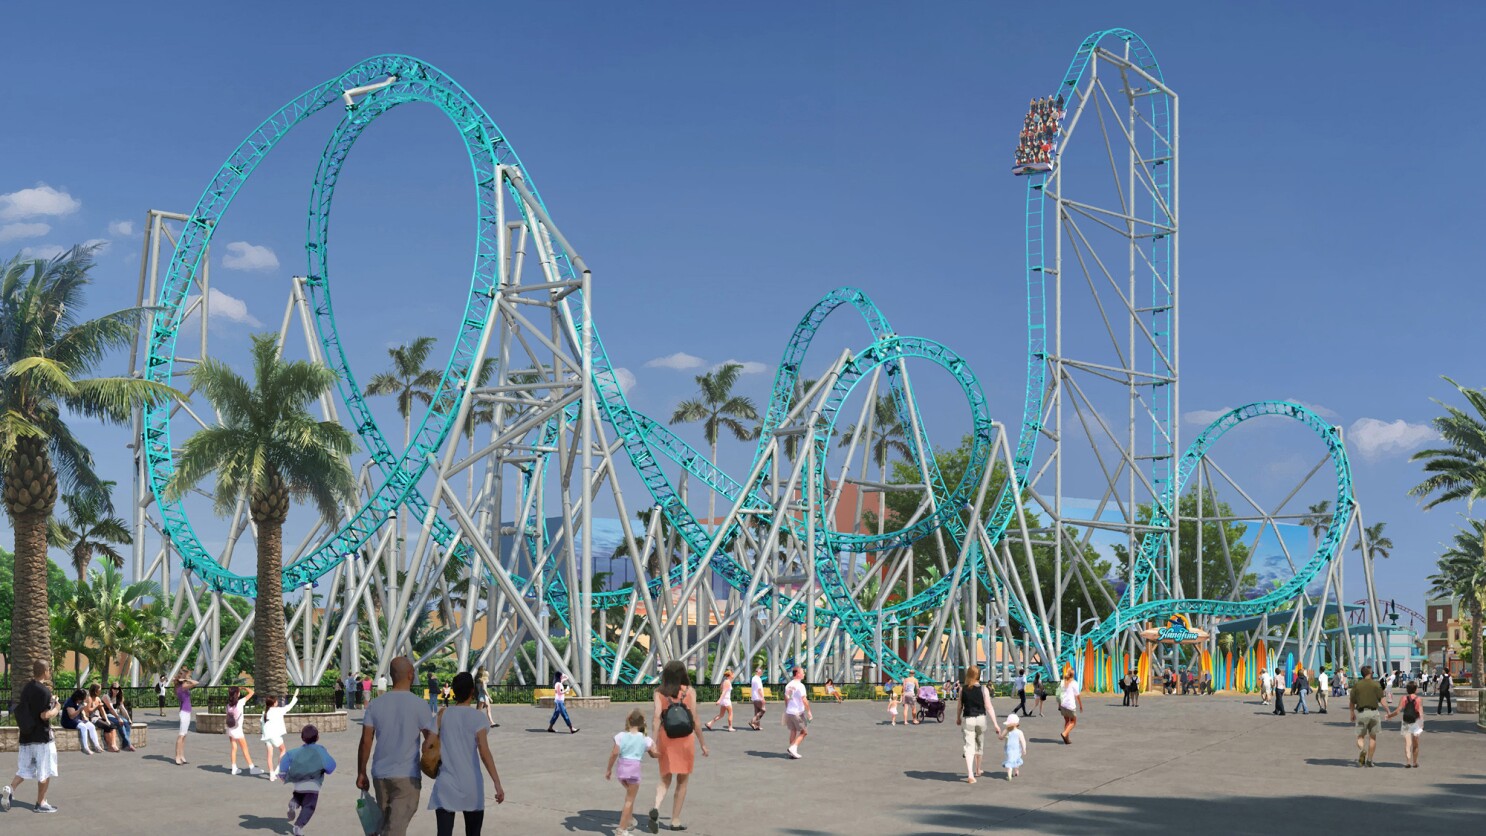 It S Been A Decade Since Knott S Built A Major Coaster Will Hangtime Be Worth The Wait Los Angeles Times